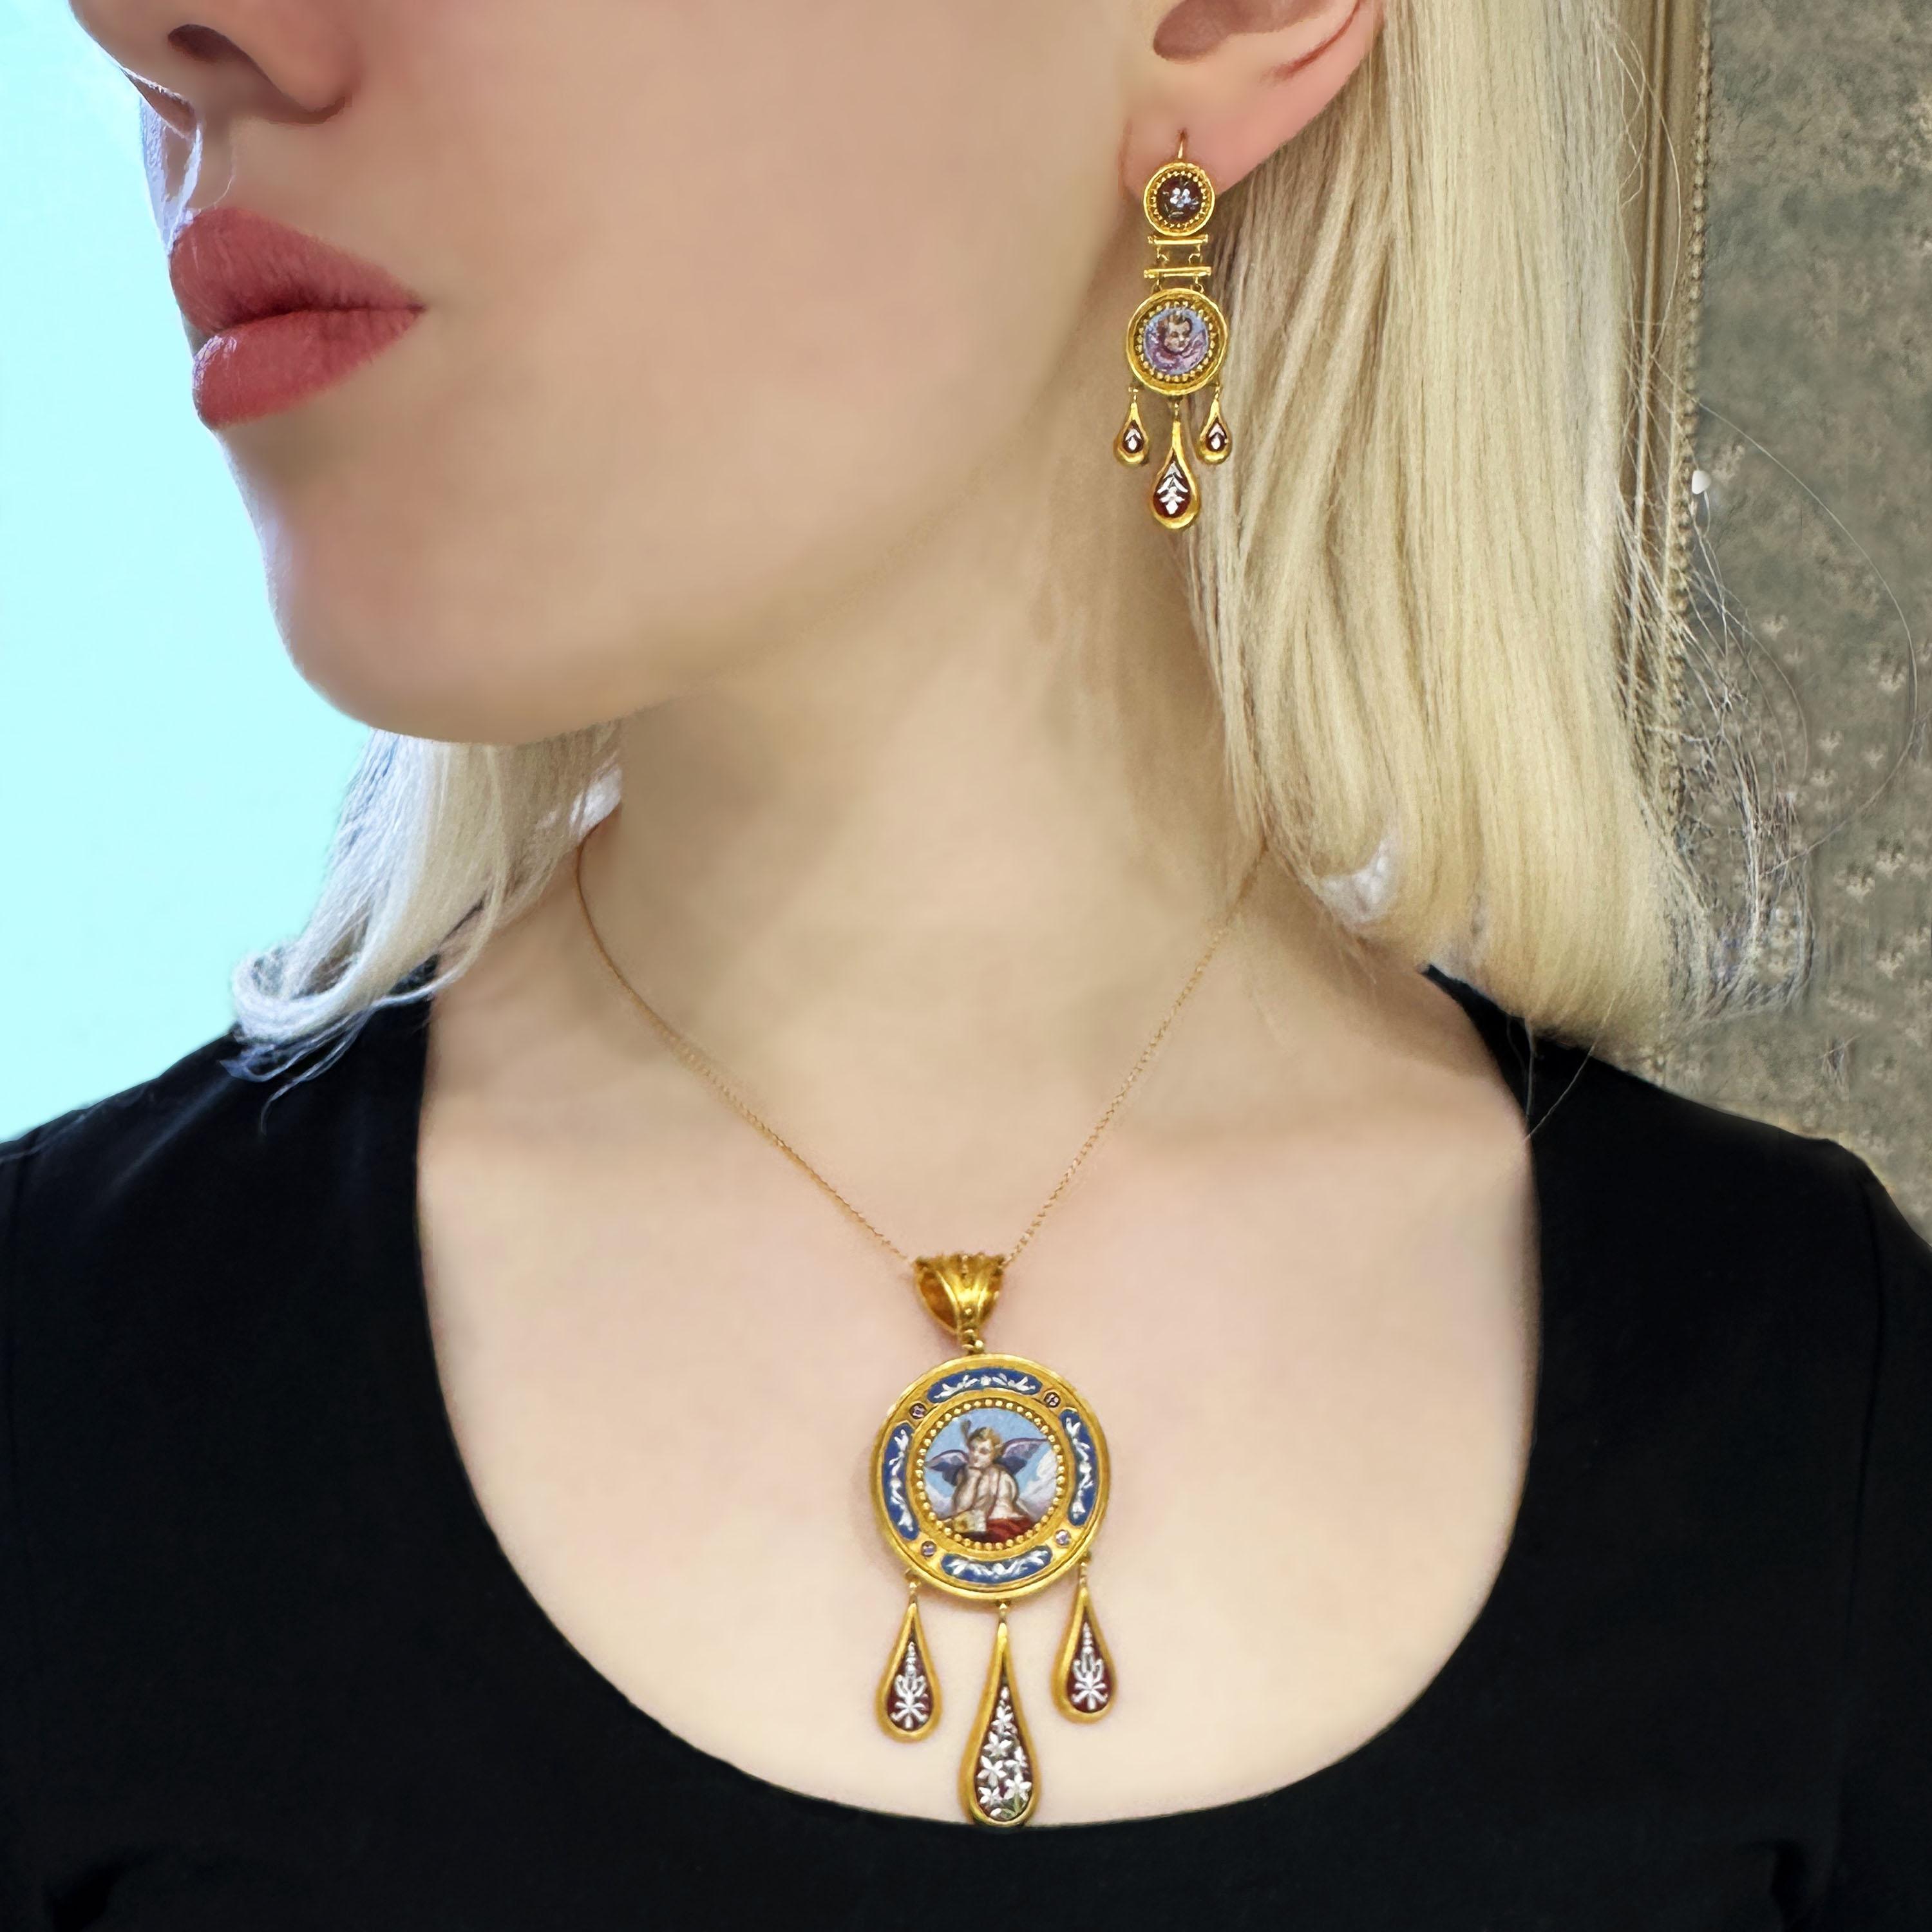 An antique Italian micromosaic and gold brooch-cum-pendant and earrings suite. The pendant has a gold bale, with granulated Etruscan style work, the central micromosaic features Cupid, with the sky as the background, with a circular surround of